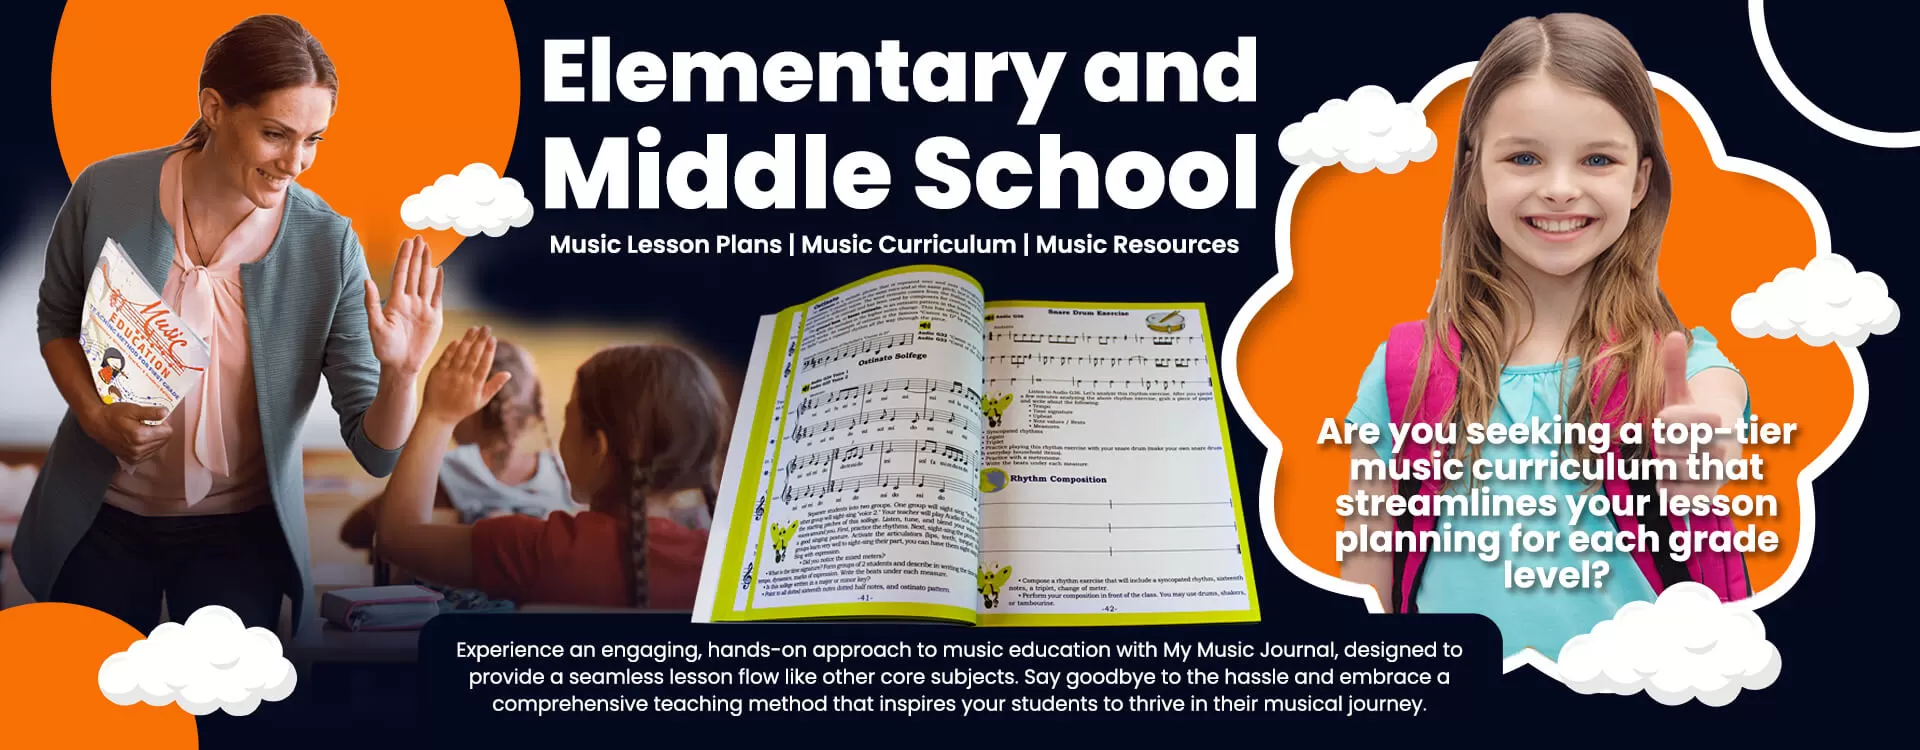 Elementary and Middle School Music Lesson Plans 